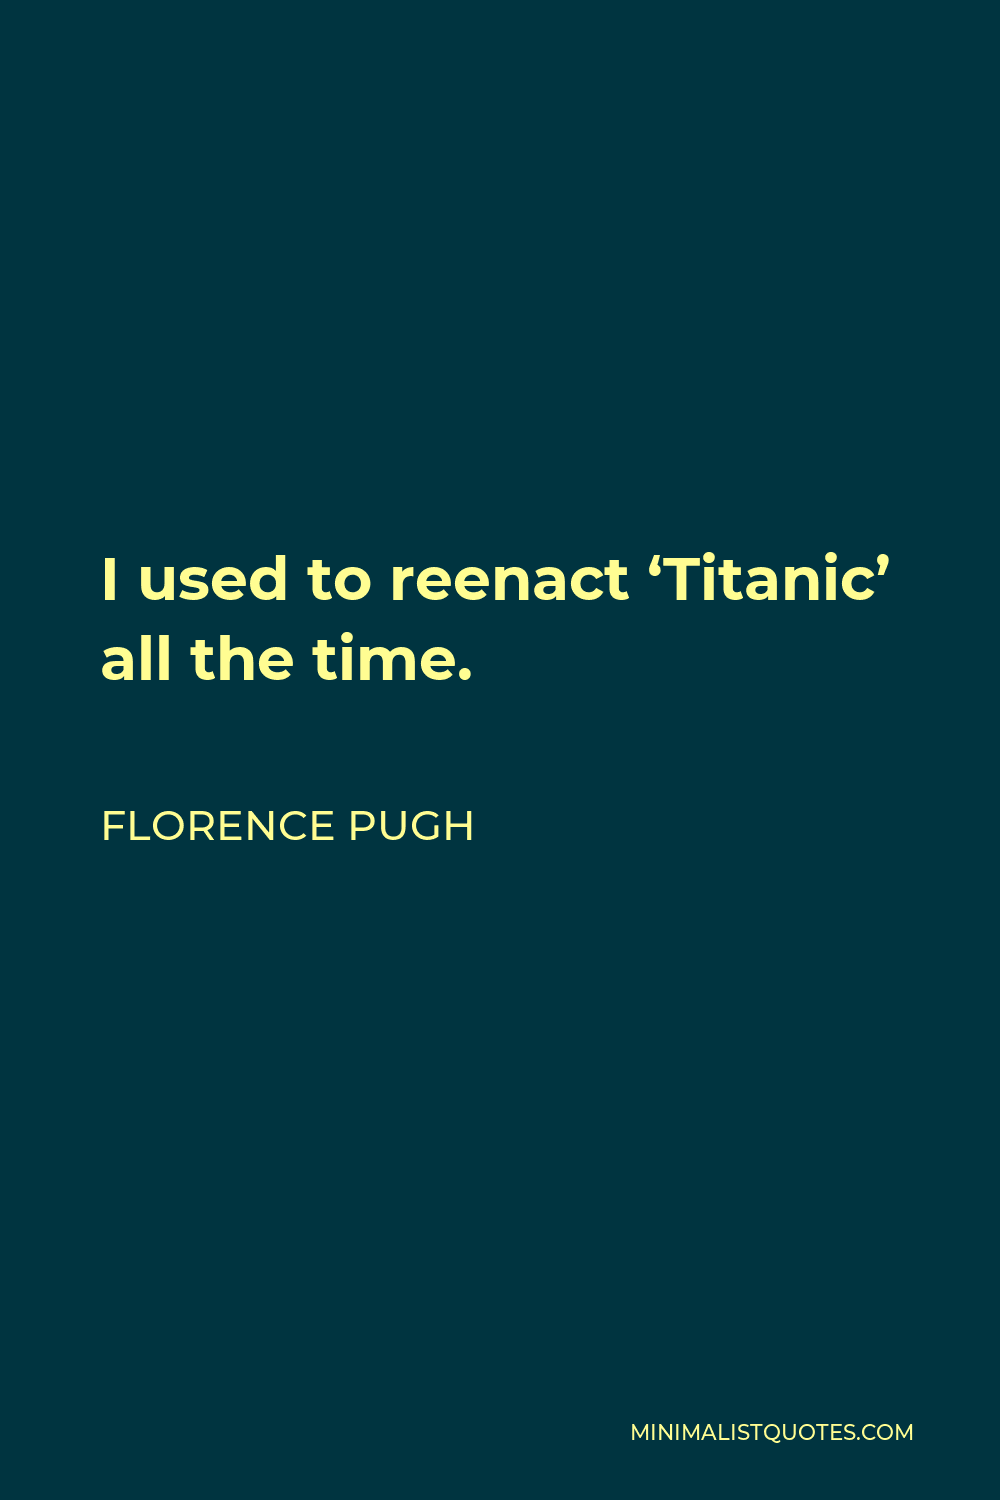 Florence Pugh Quote - I used to reenact ‘Titanic’ all the time.